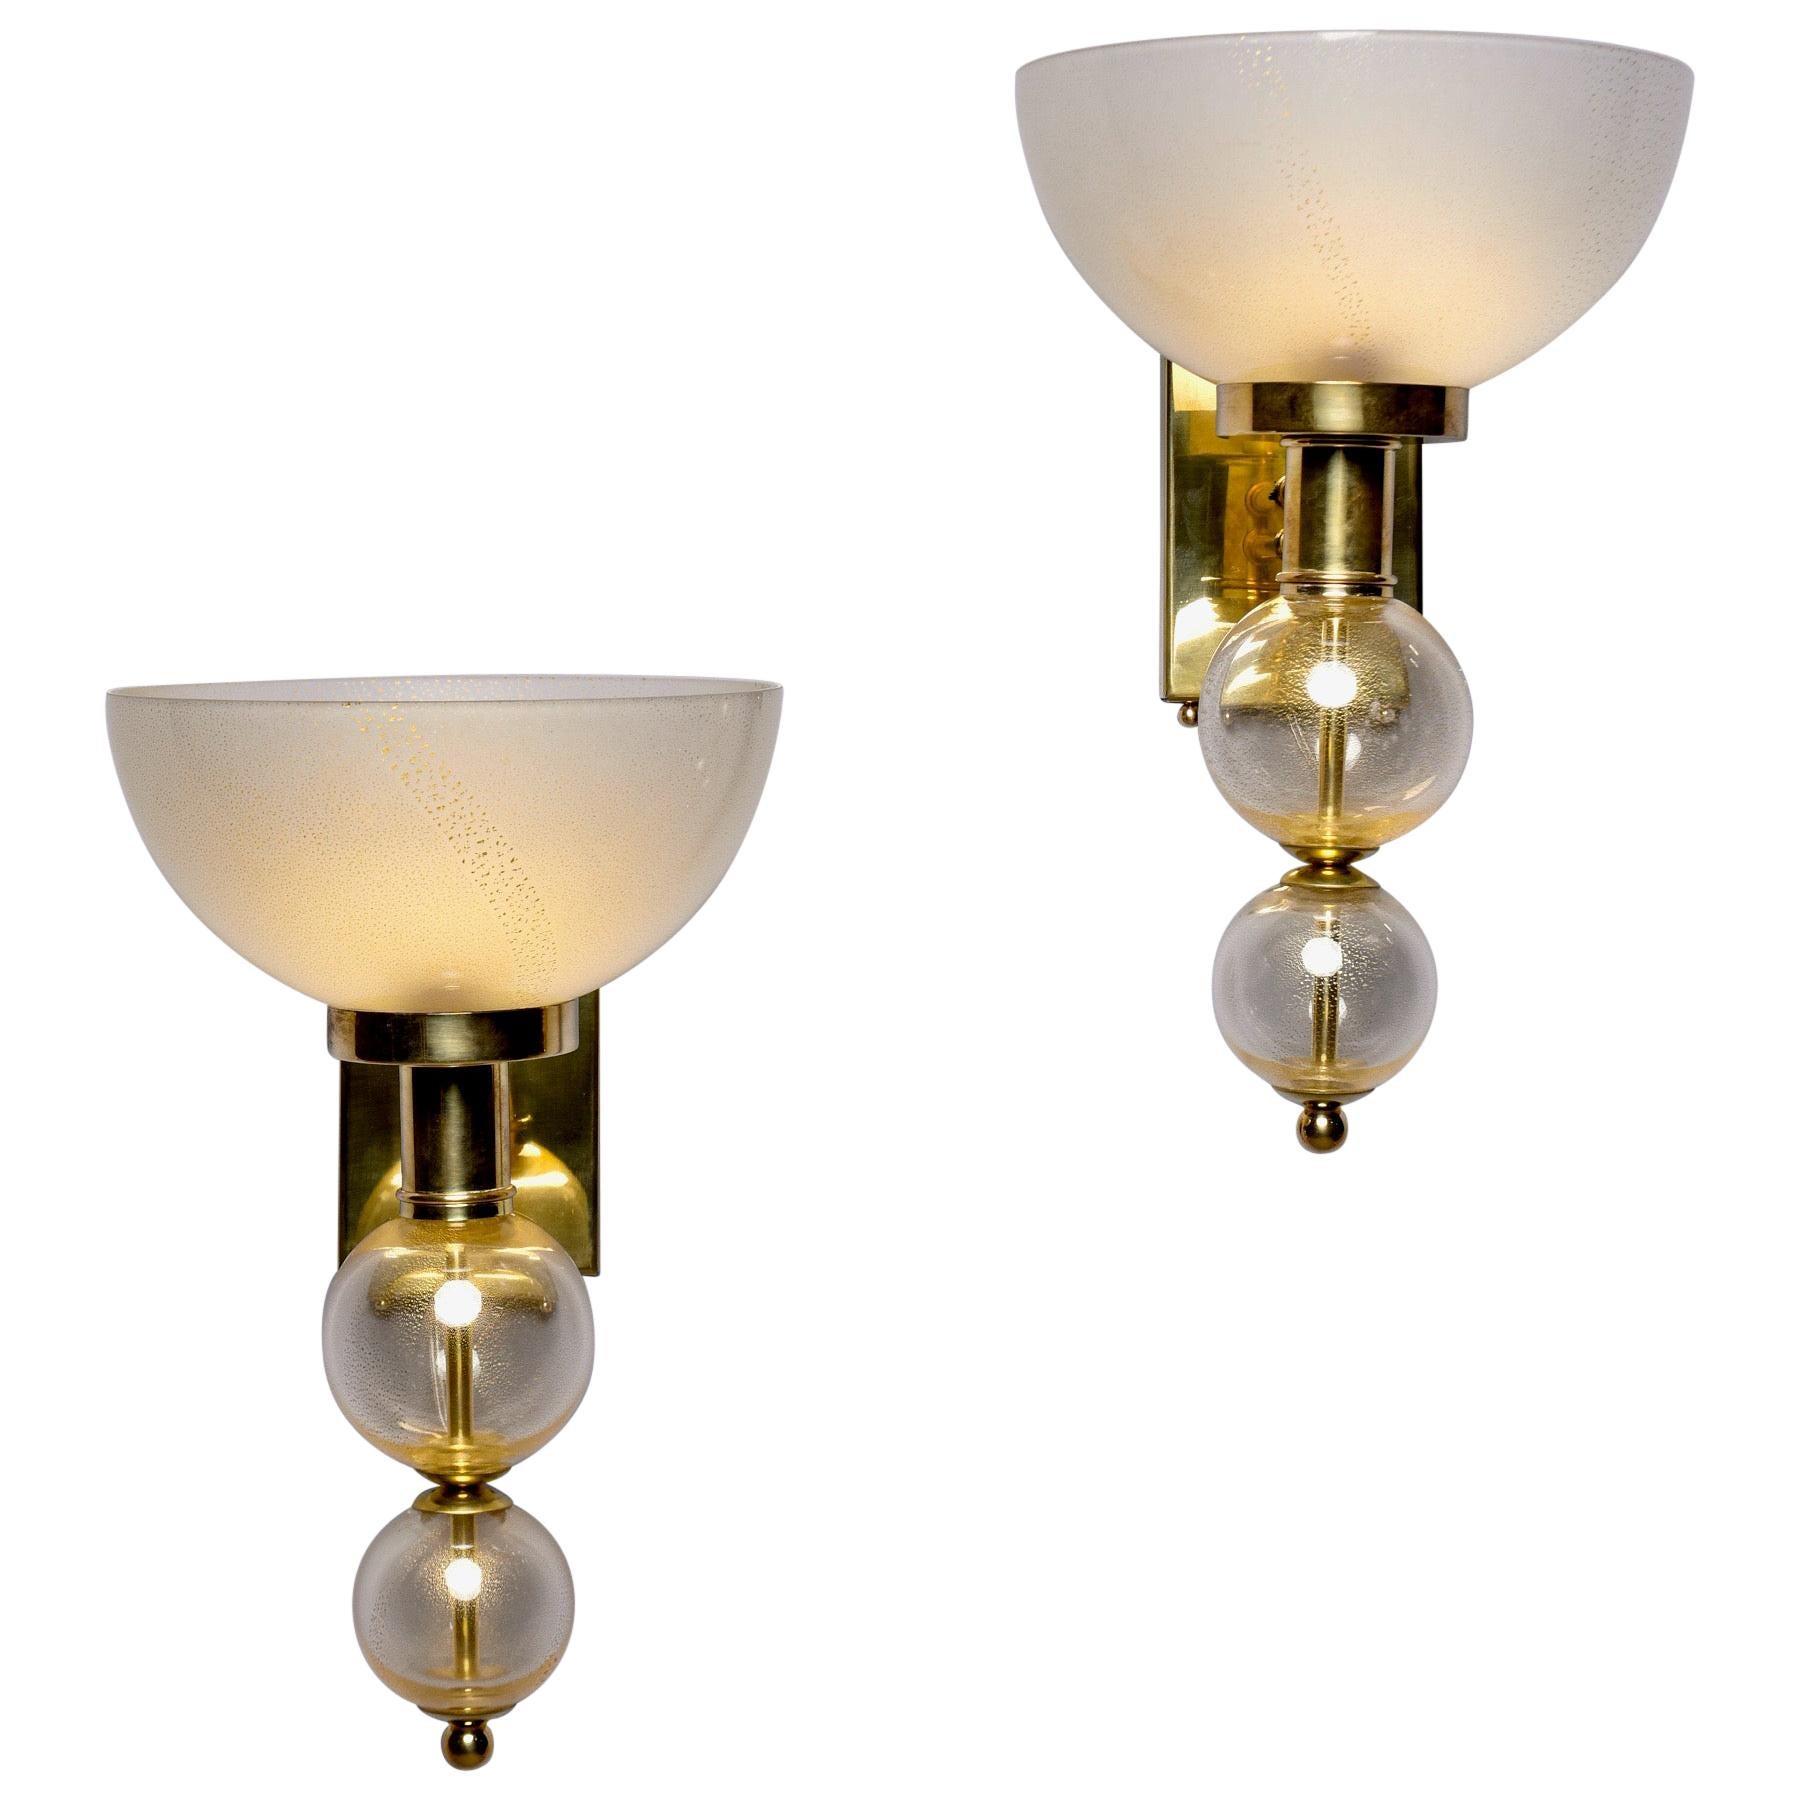 Hand Blown Murano Glass Sconces with Gold Flecks and Brass Fittings